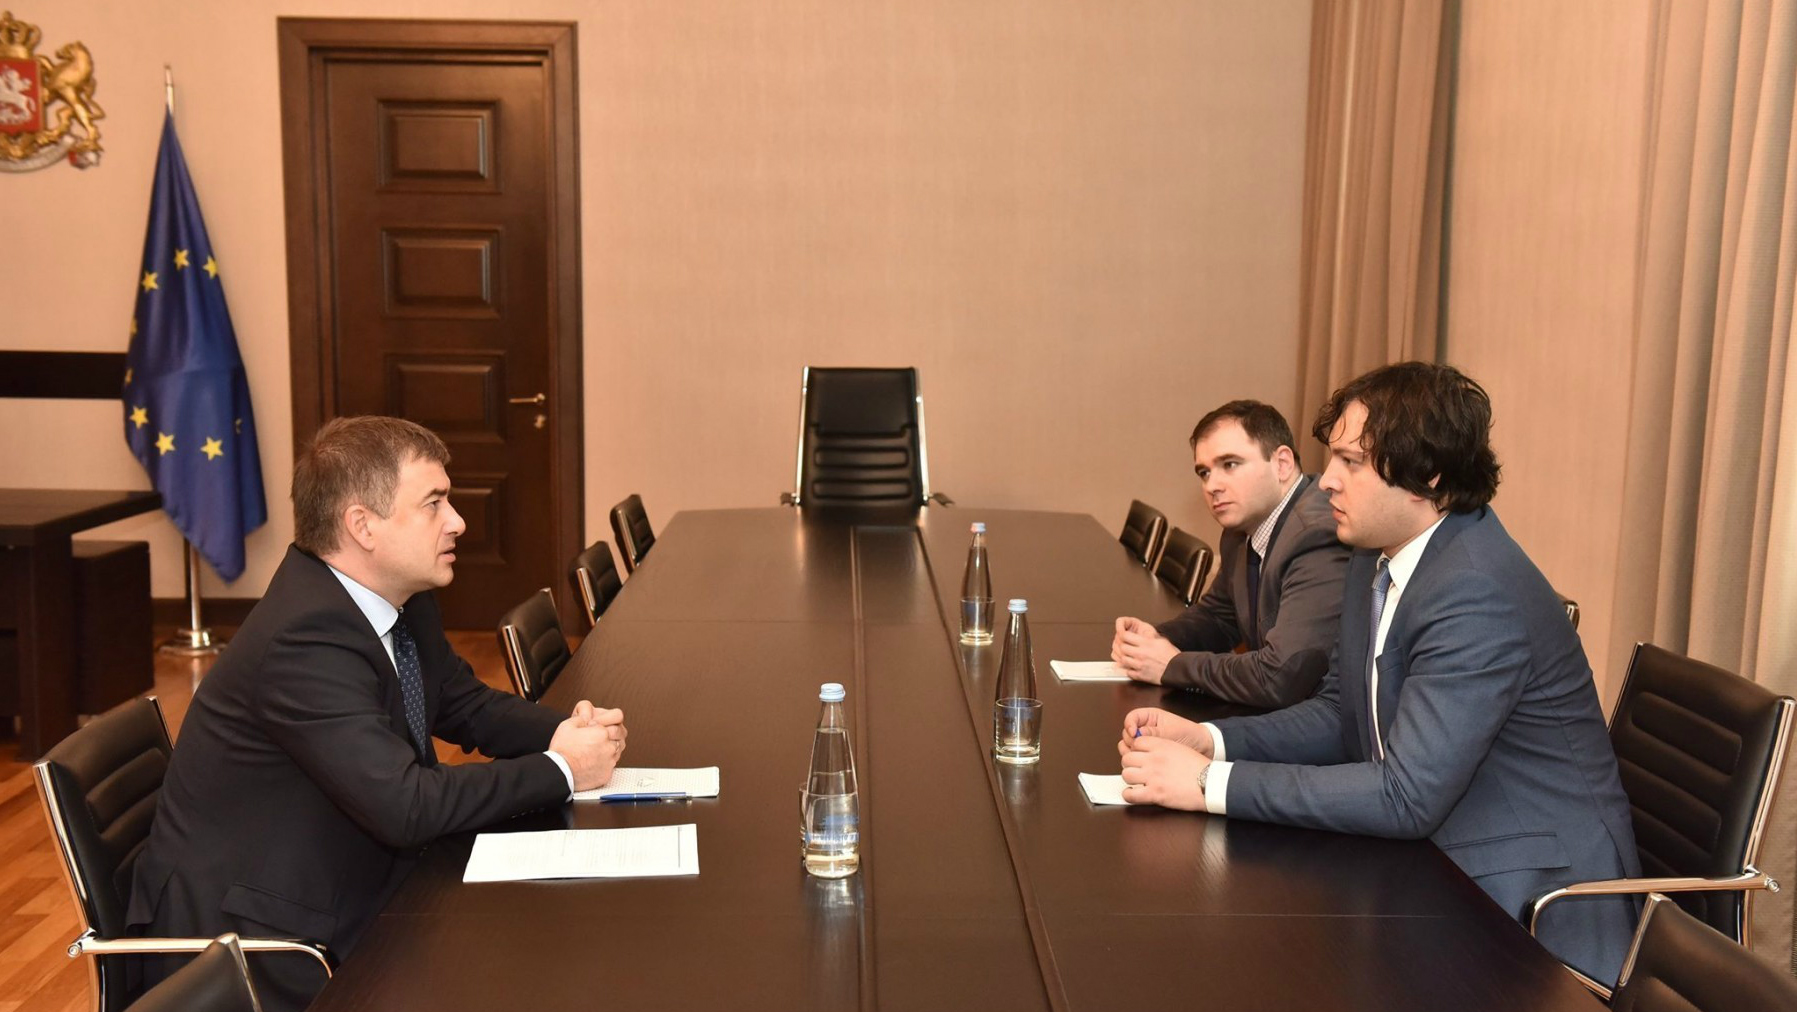 The Head of the Council of Europe Office in Georgia met with the Chairman of the Parliament